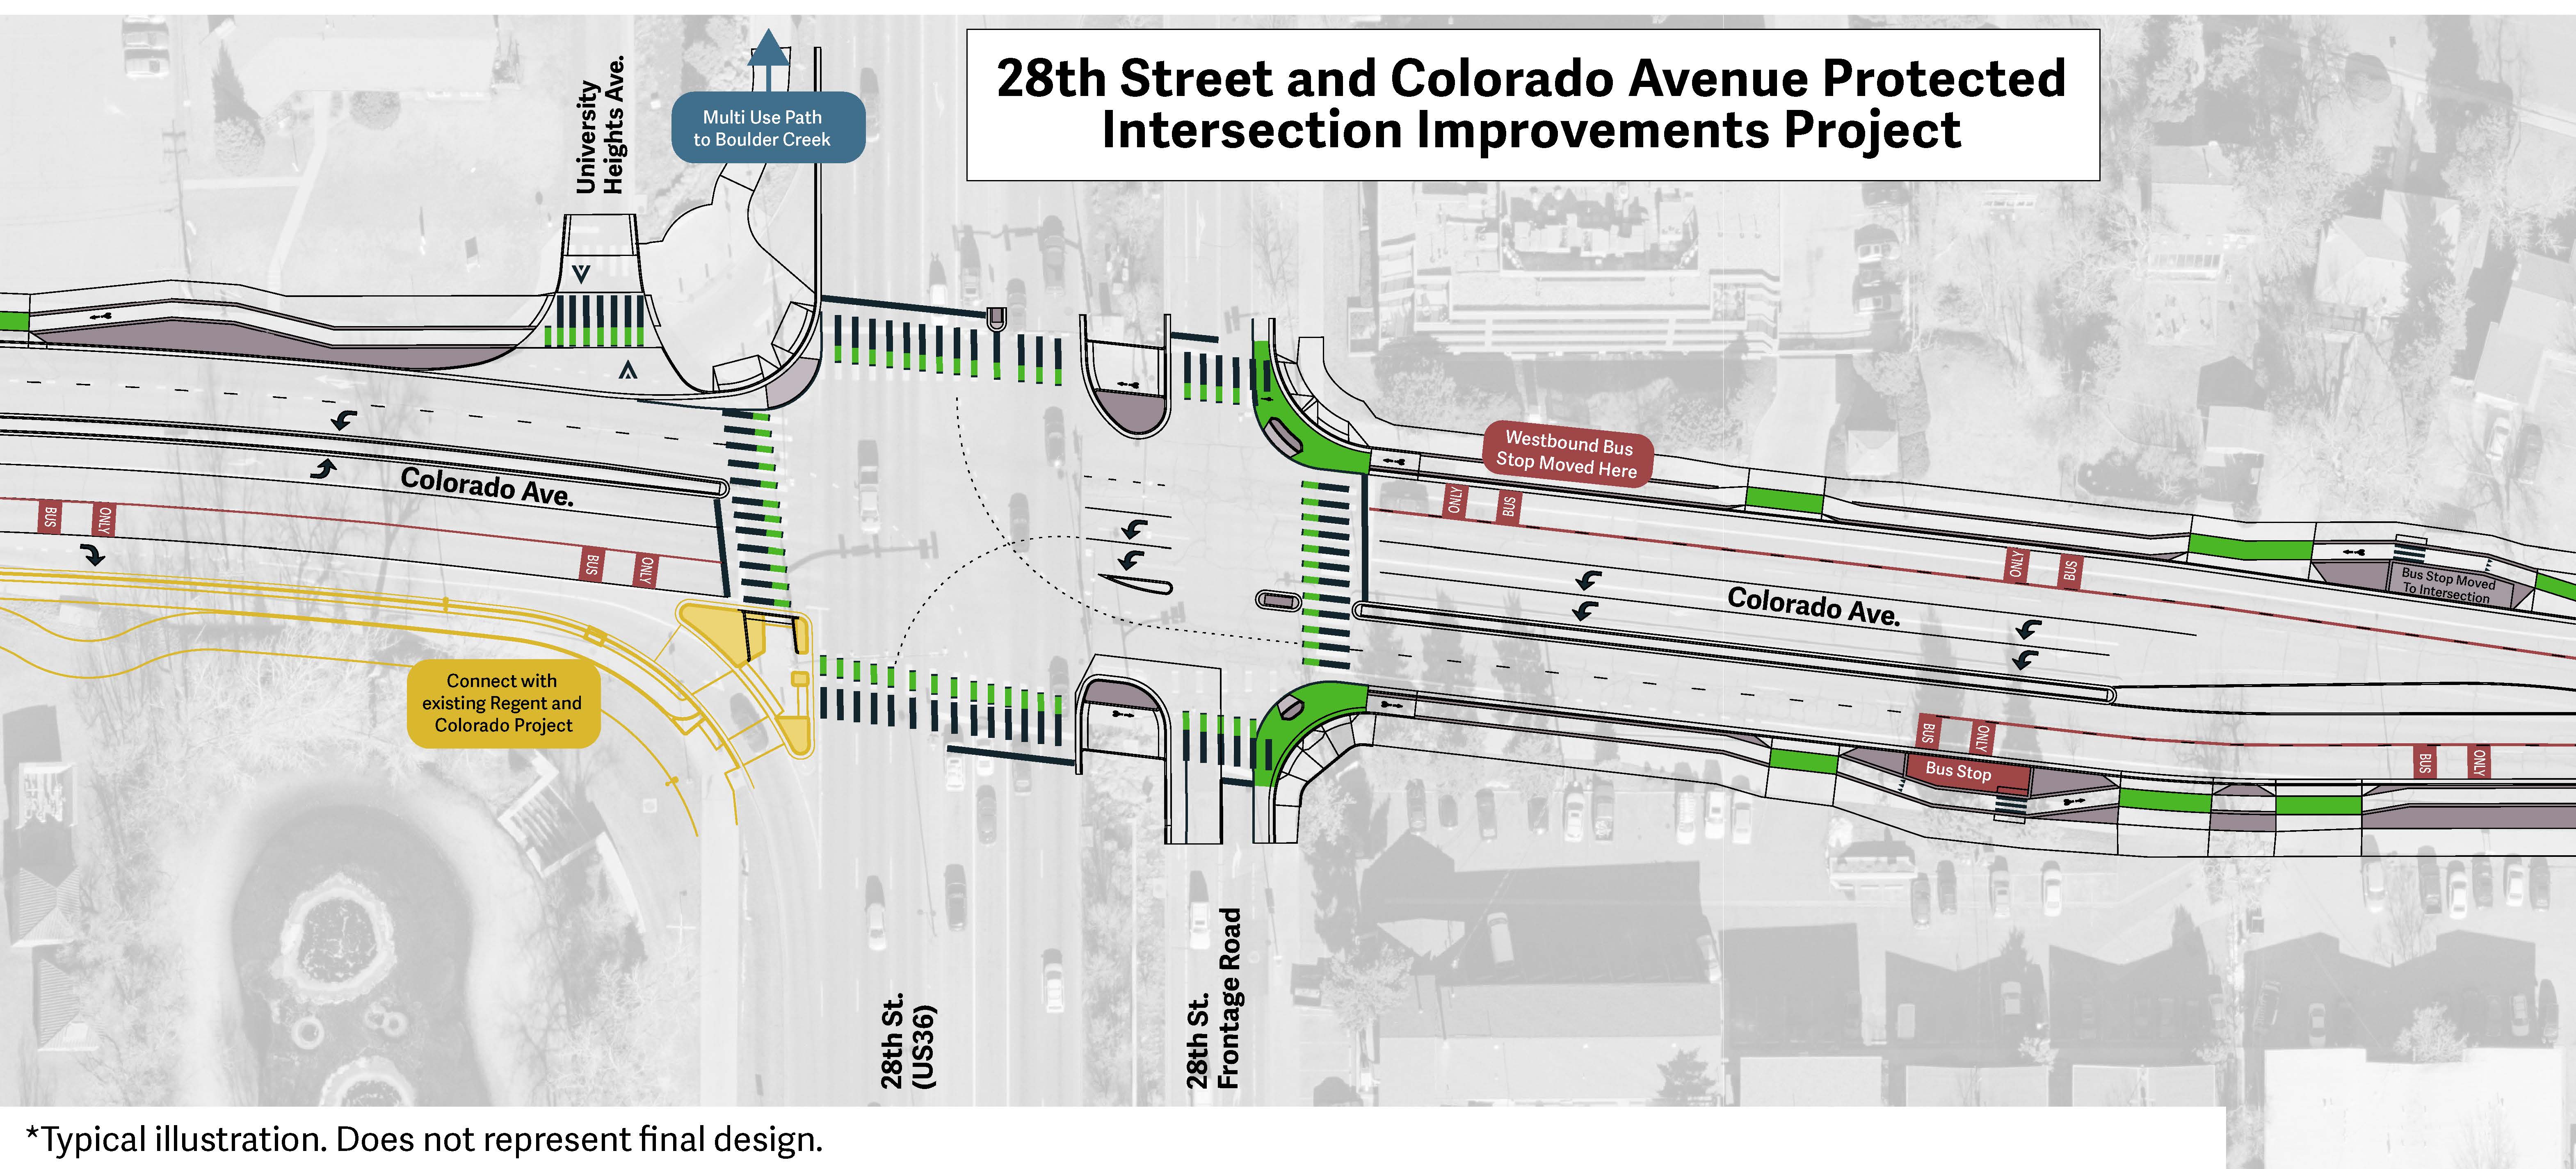 A 28th and Colorado project concept graphic illustrating improvements. Long description in caption.